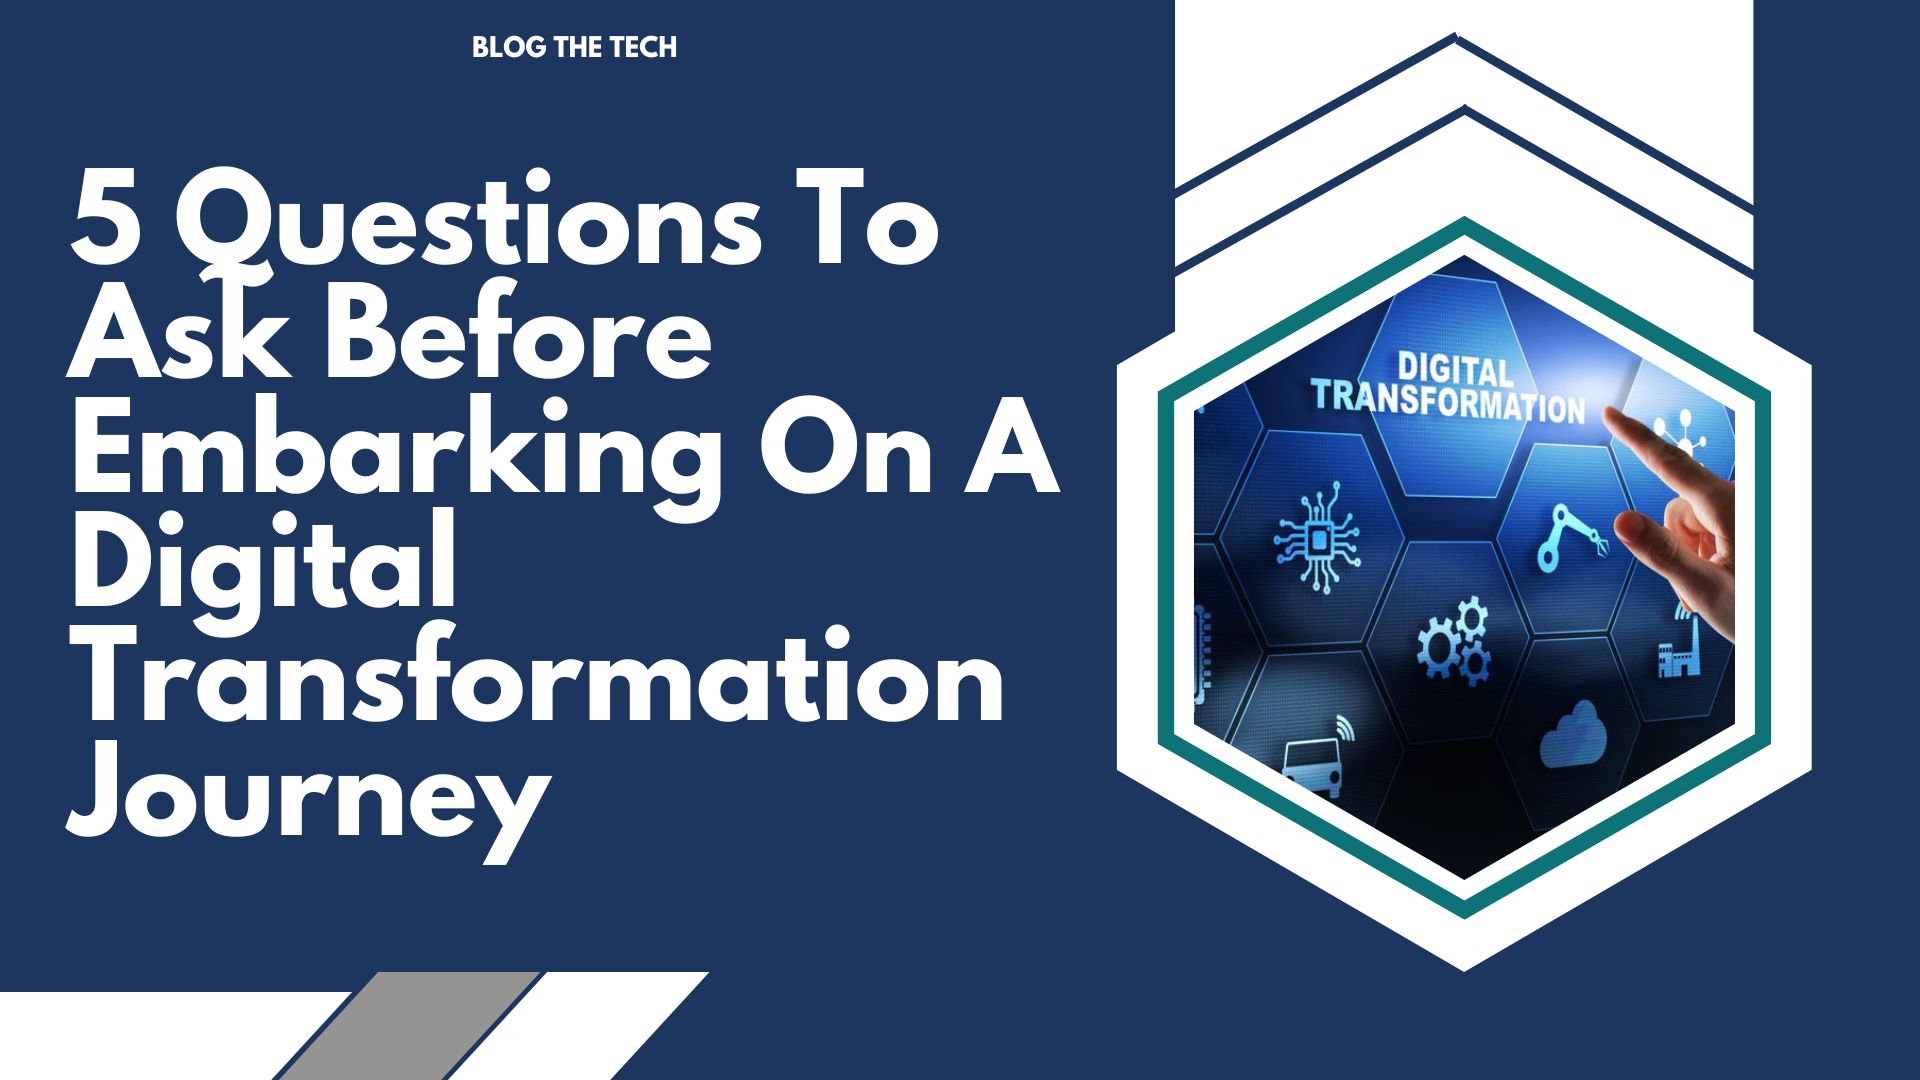 5 Questions To Ask Before Embarking On A Digital Transformation Journey